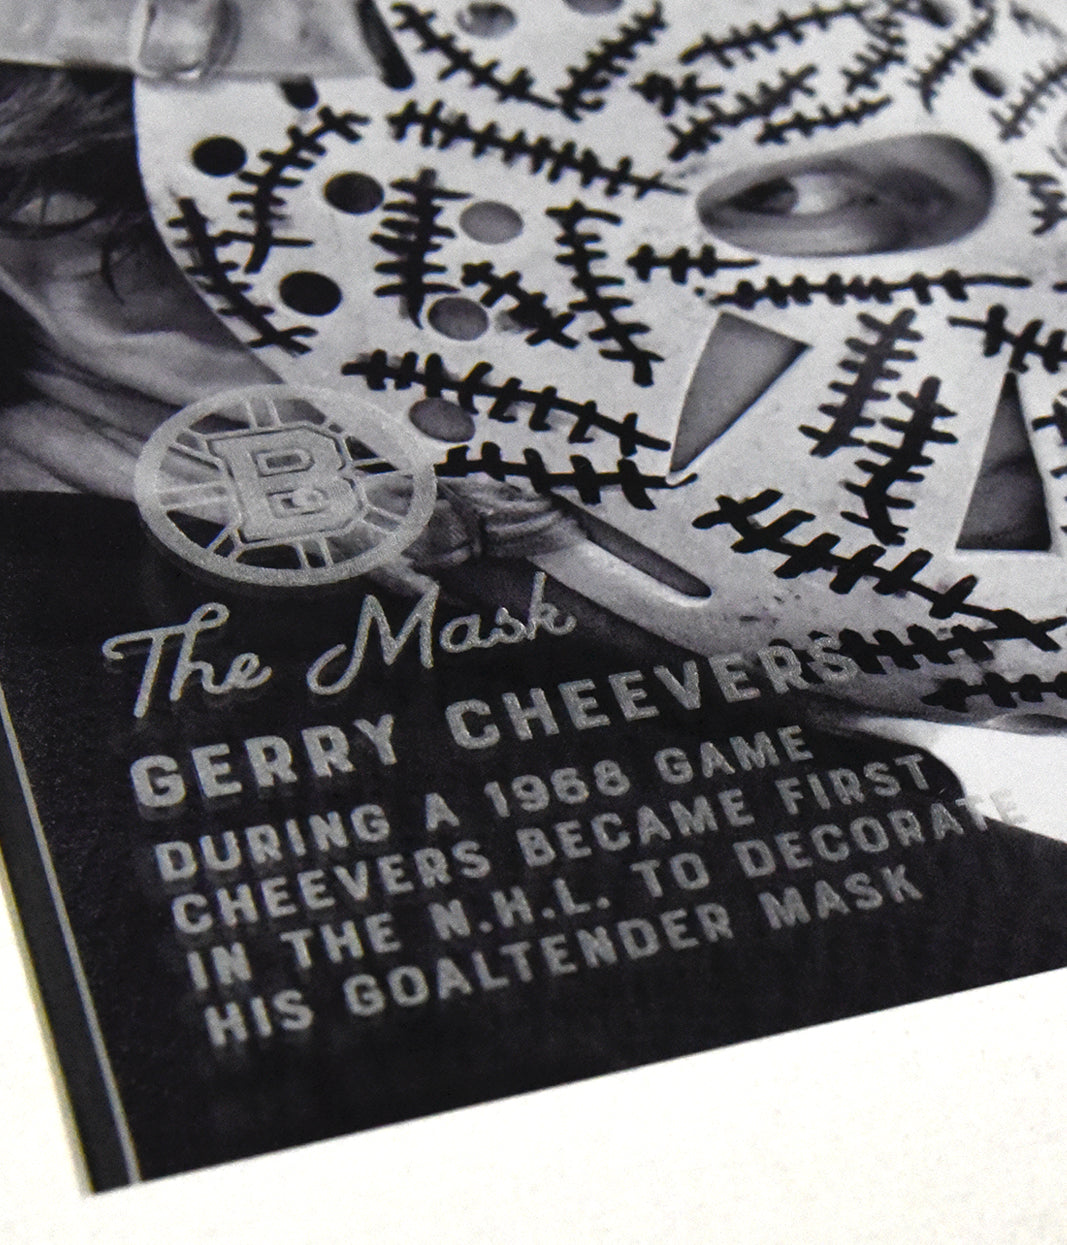 Gerry Cheevers | Mask